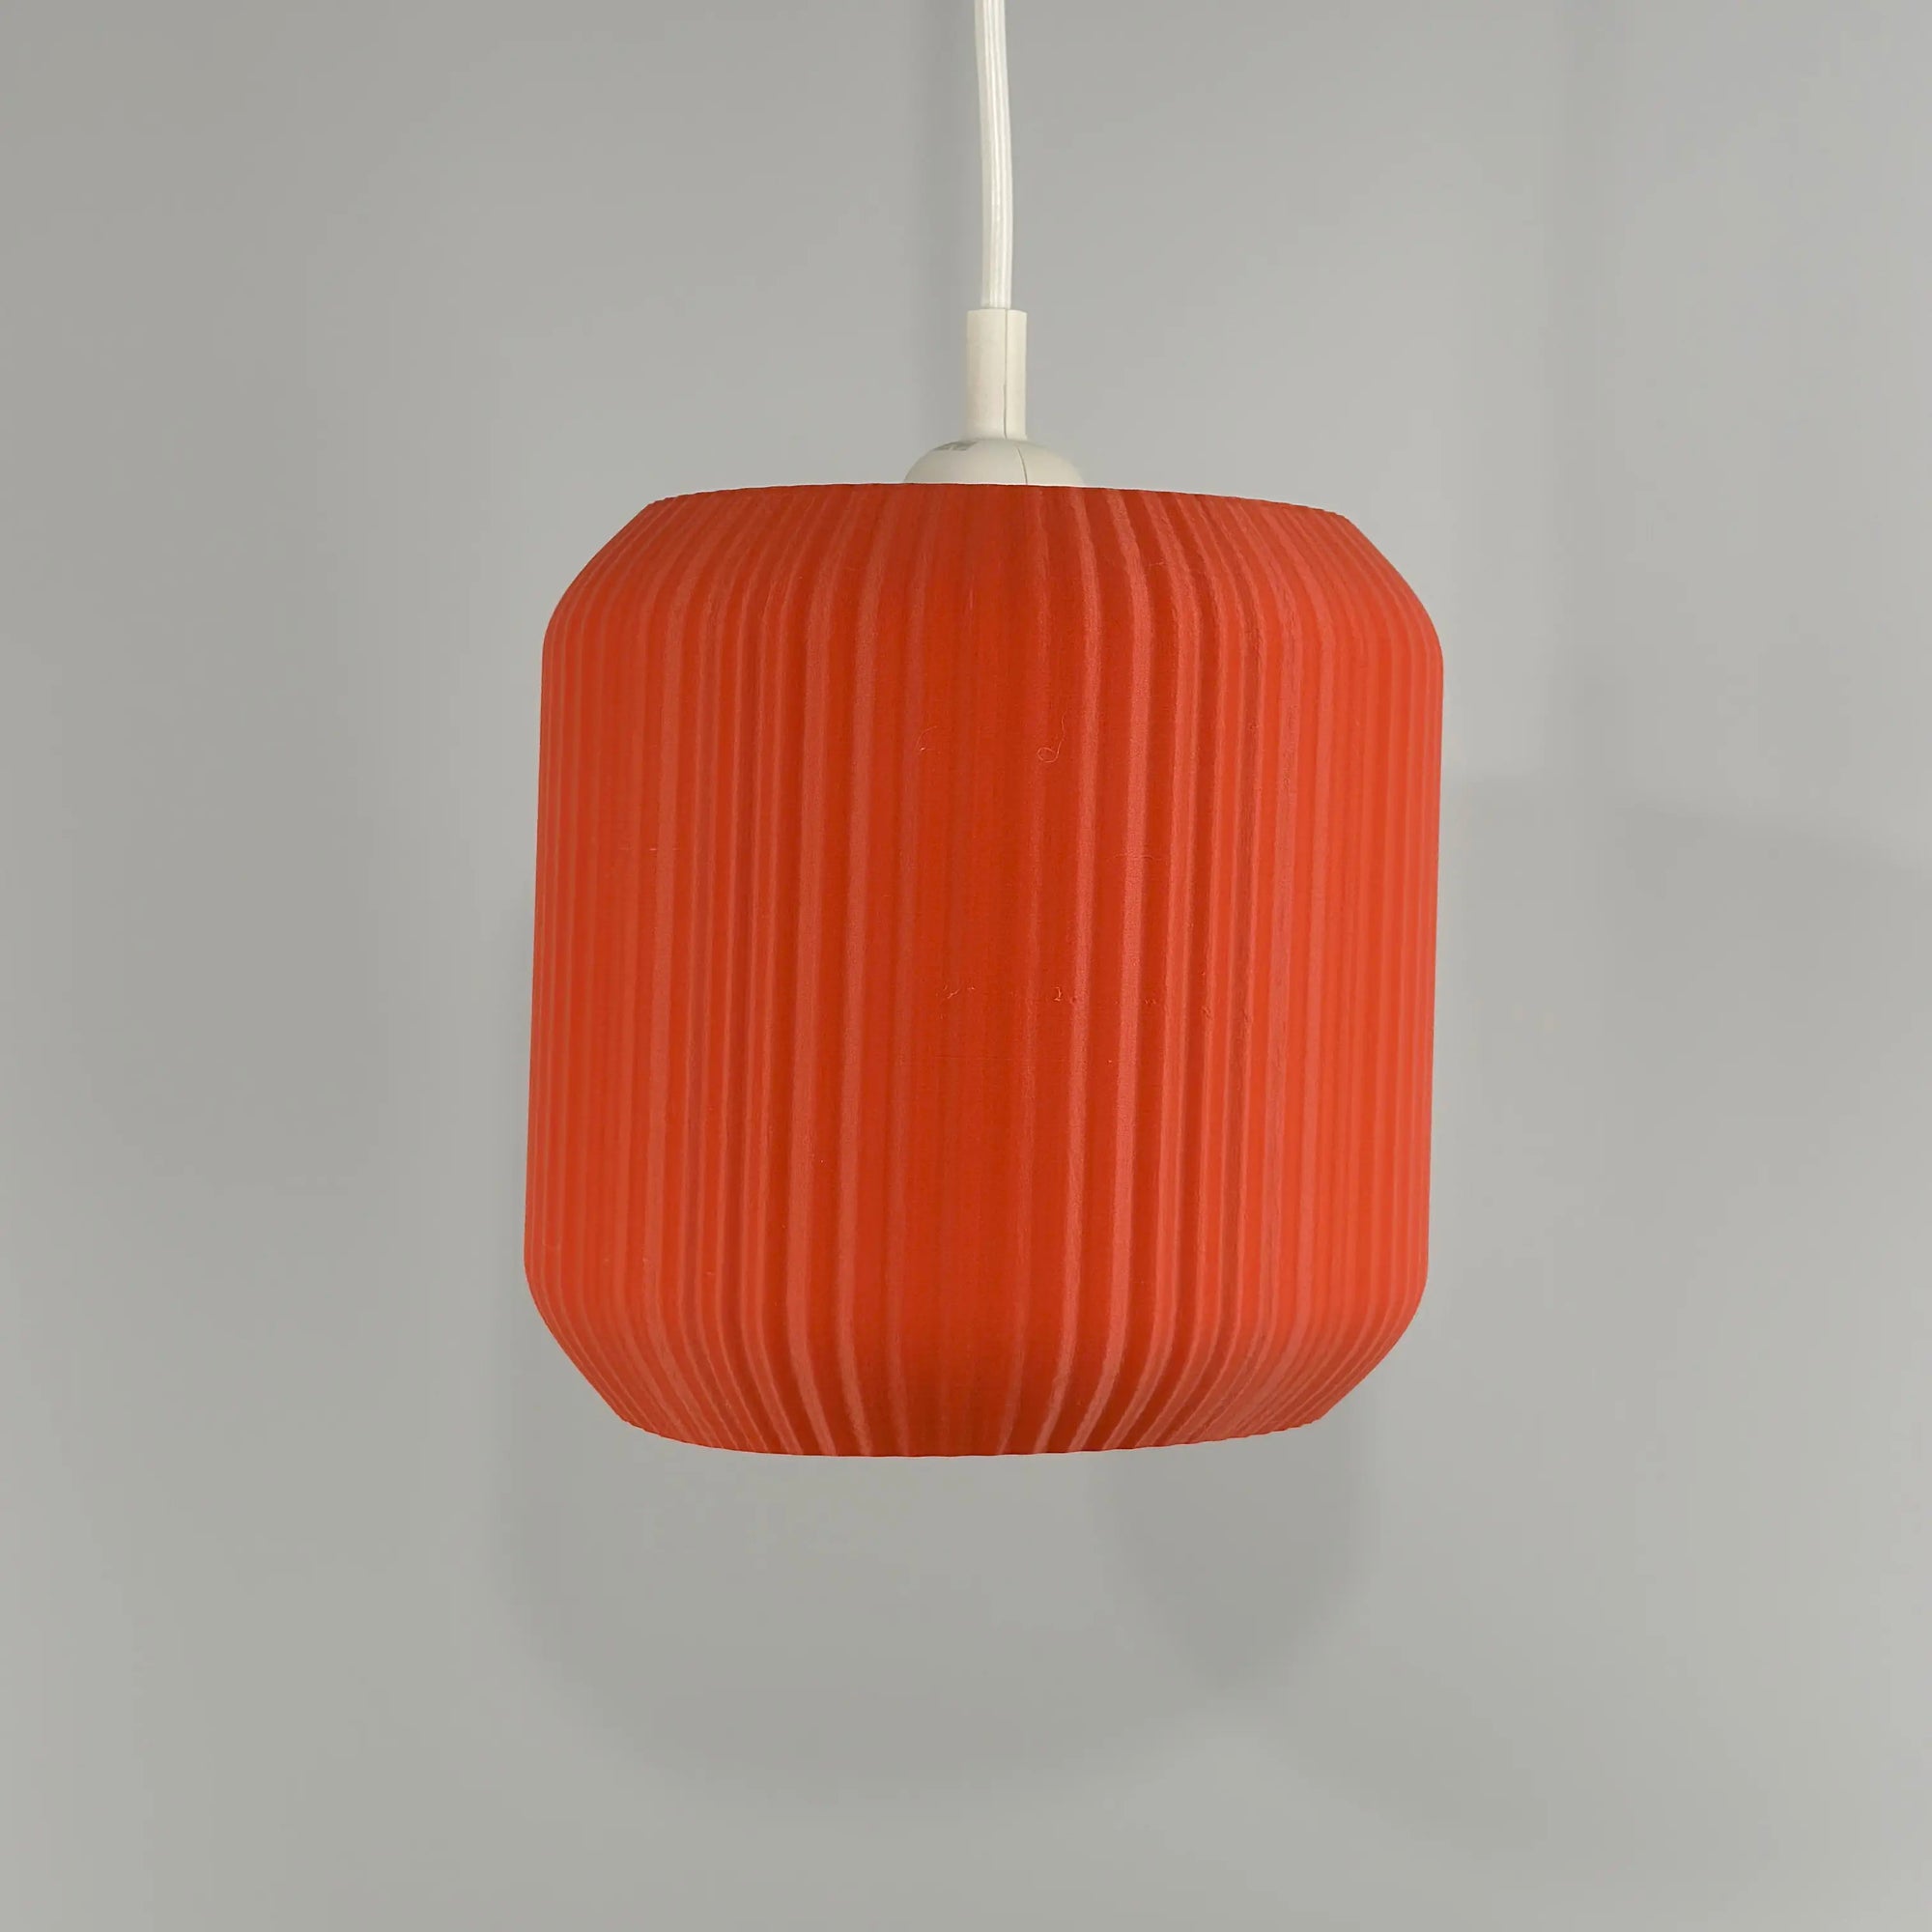 Assortment of Lucash lampshades in various colors, demonstrating customization options for personal style.